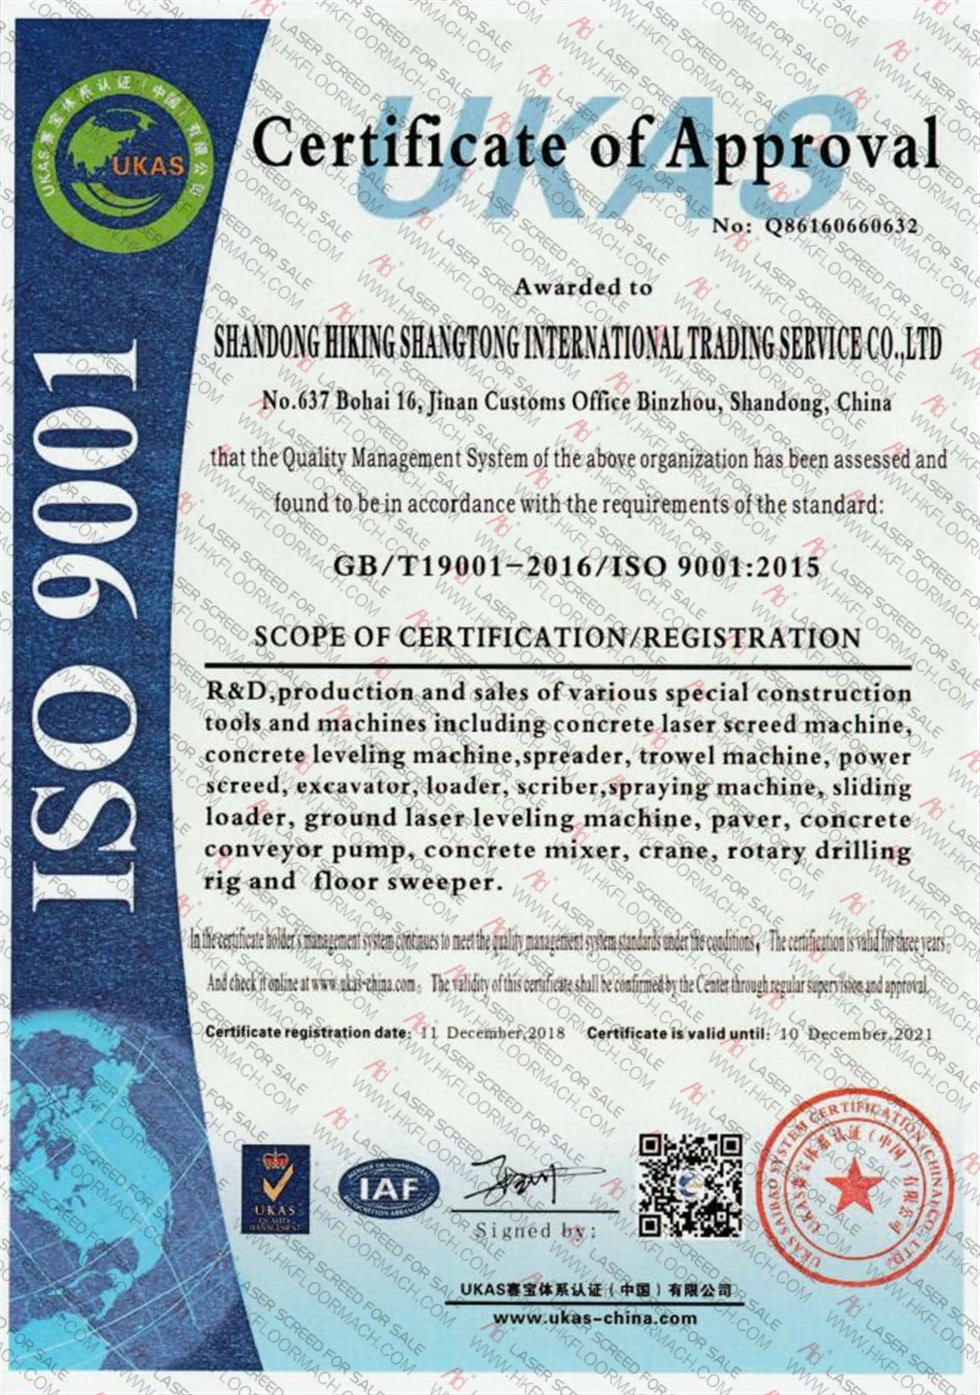 HIKING® Enterprises have passed ISO 9001:2015 Quality Certification